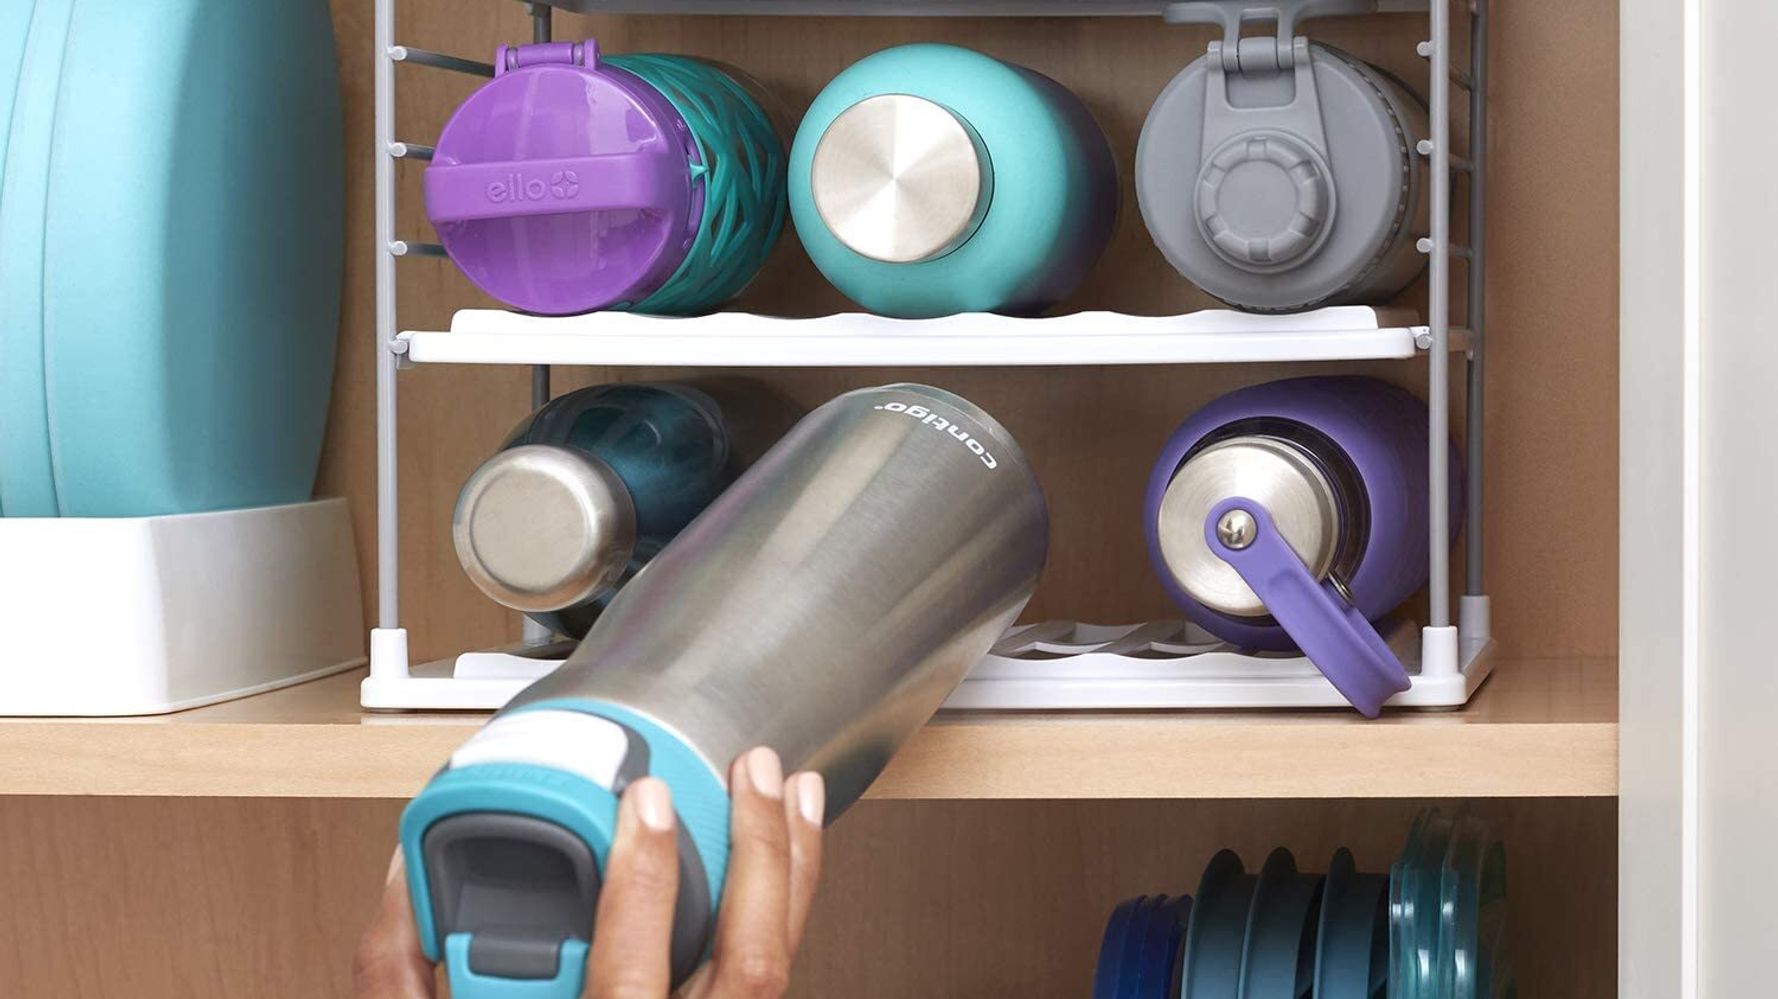 30 Products That'll Help Organize Hidden Messes